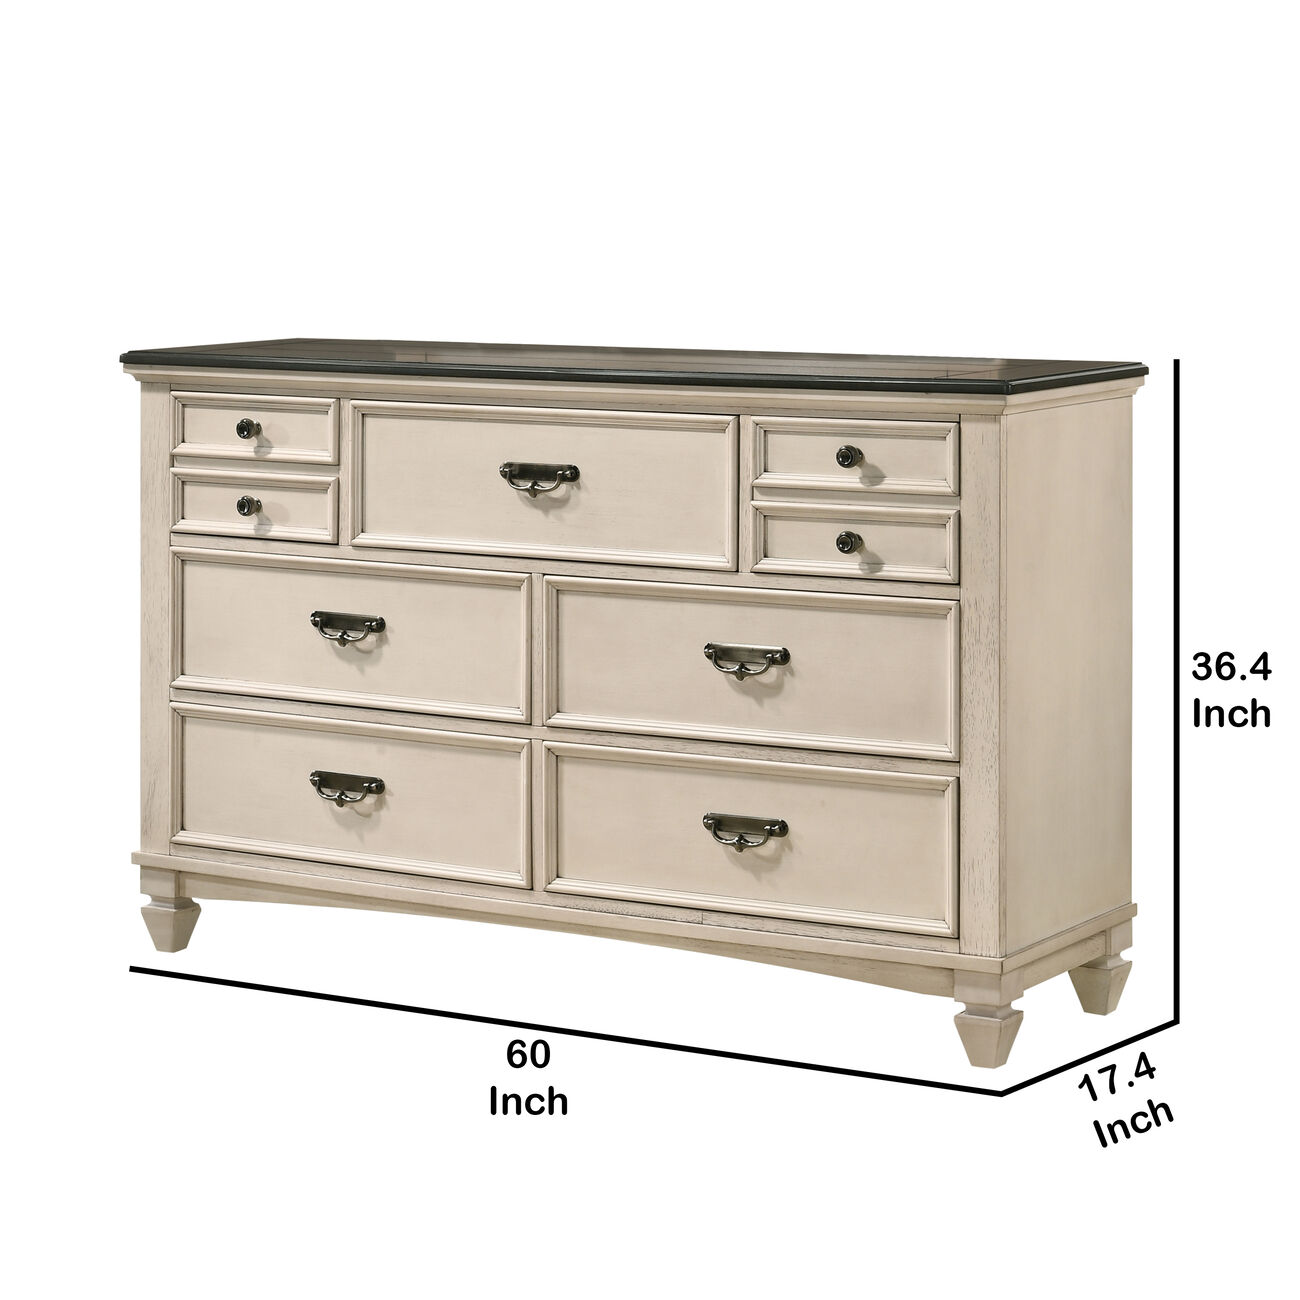 Wooden Dresser with Marble Top and 7 Spacious Drawers, Beige